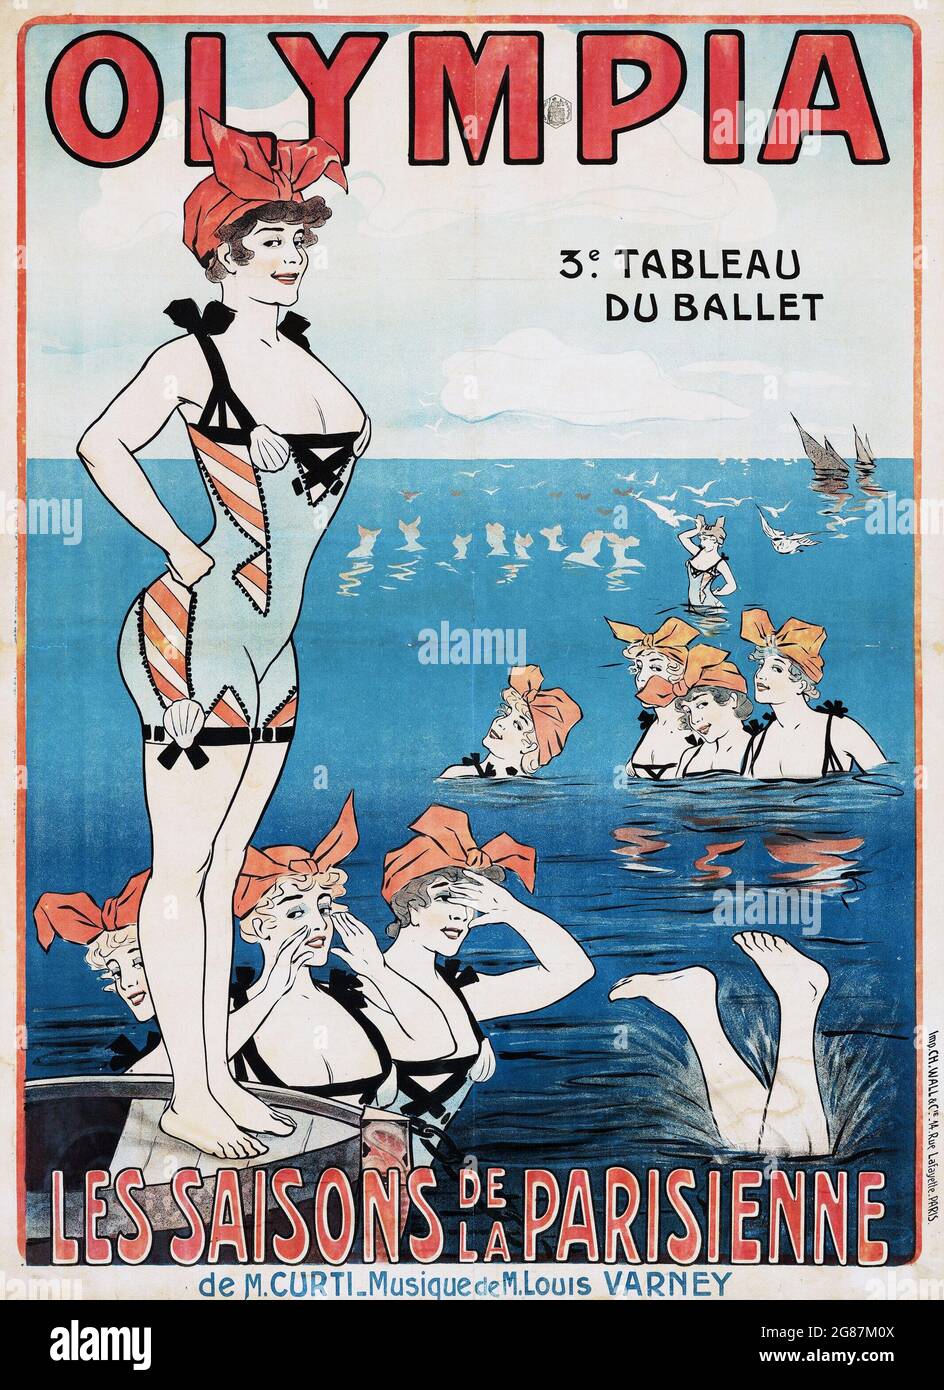 Vintage poster: Les Saisons de la Parisienne at the Olympia (Early 1900s). French Theater Poster. Woman in bathing suit. Stock Photo